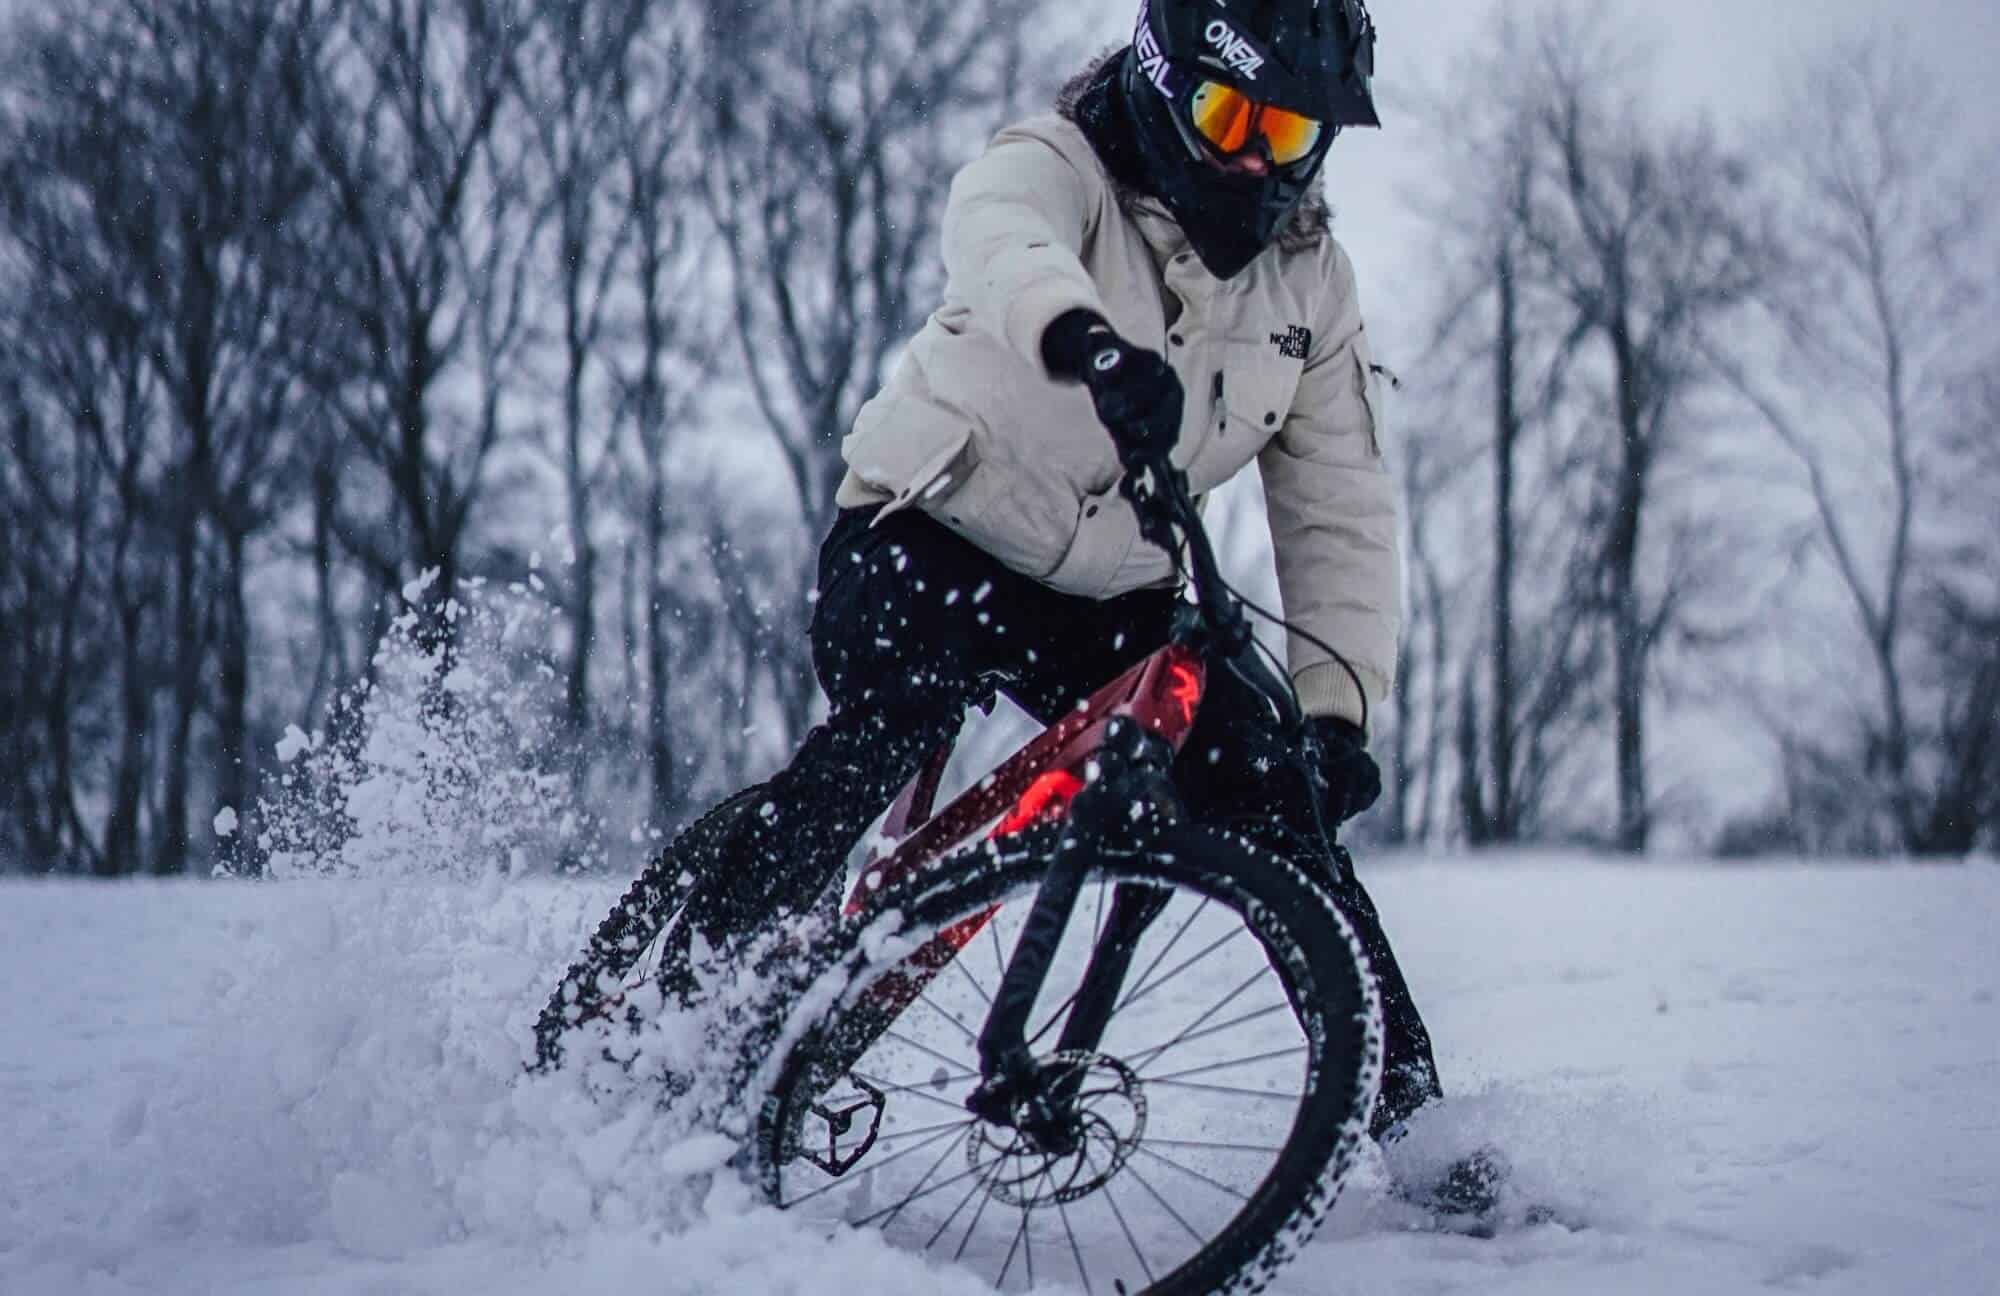 Winter Riding Series #2 – Handling Snowy Or Icy Conditions On The Trail